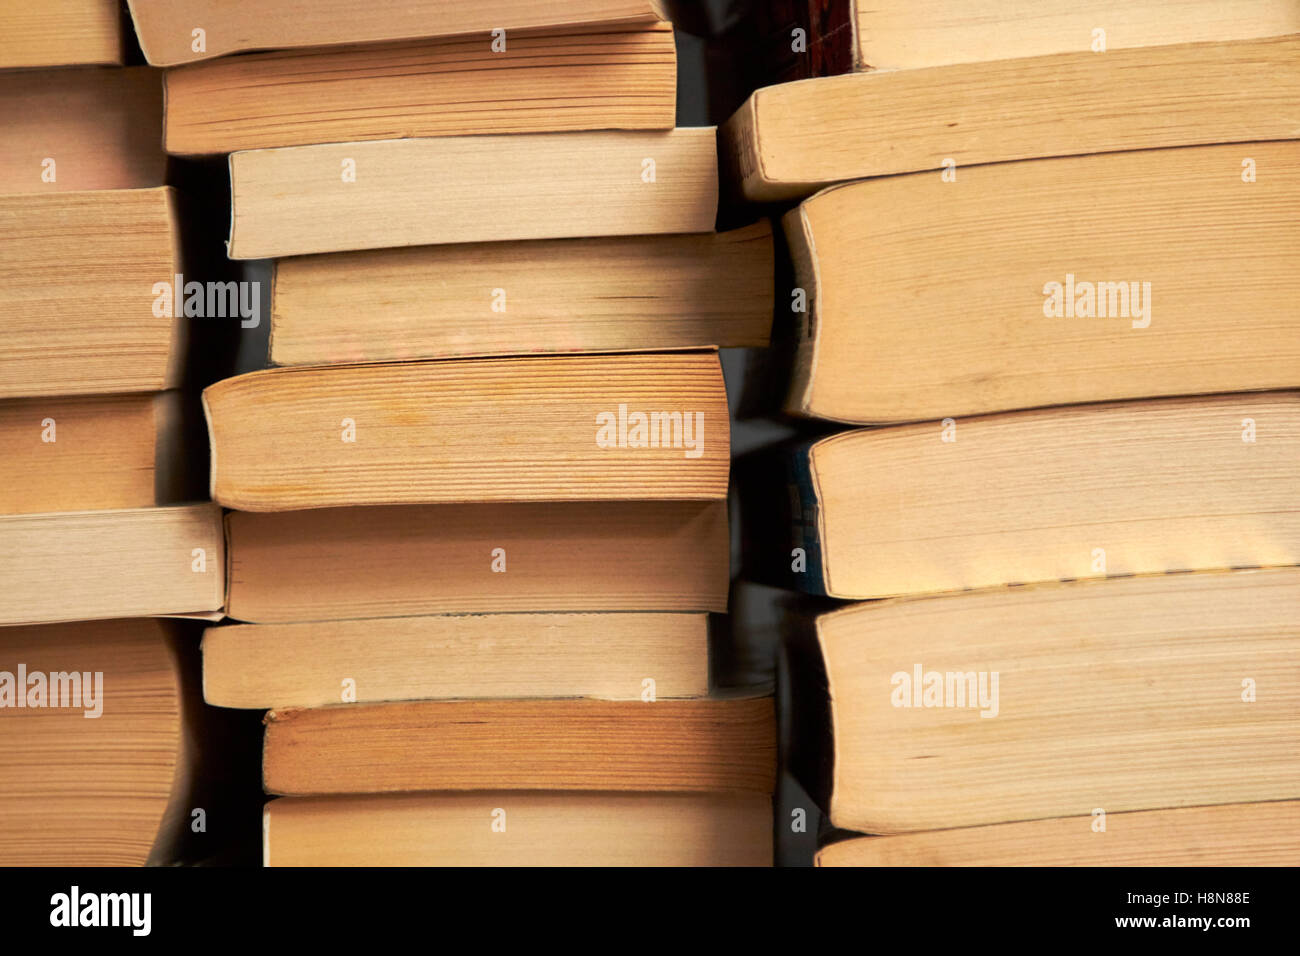 pile of stacks of used paperback books in the uk Stock Photo